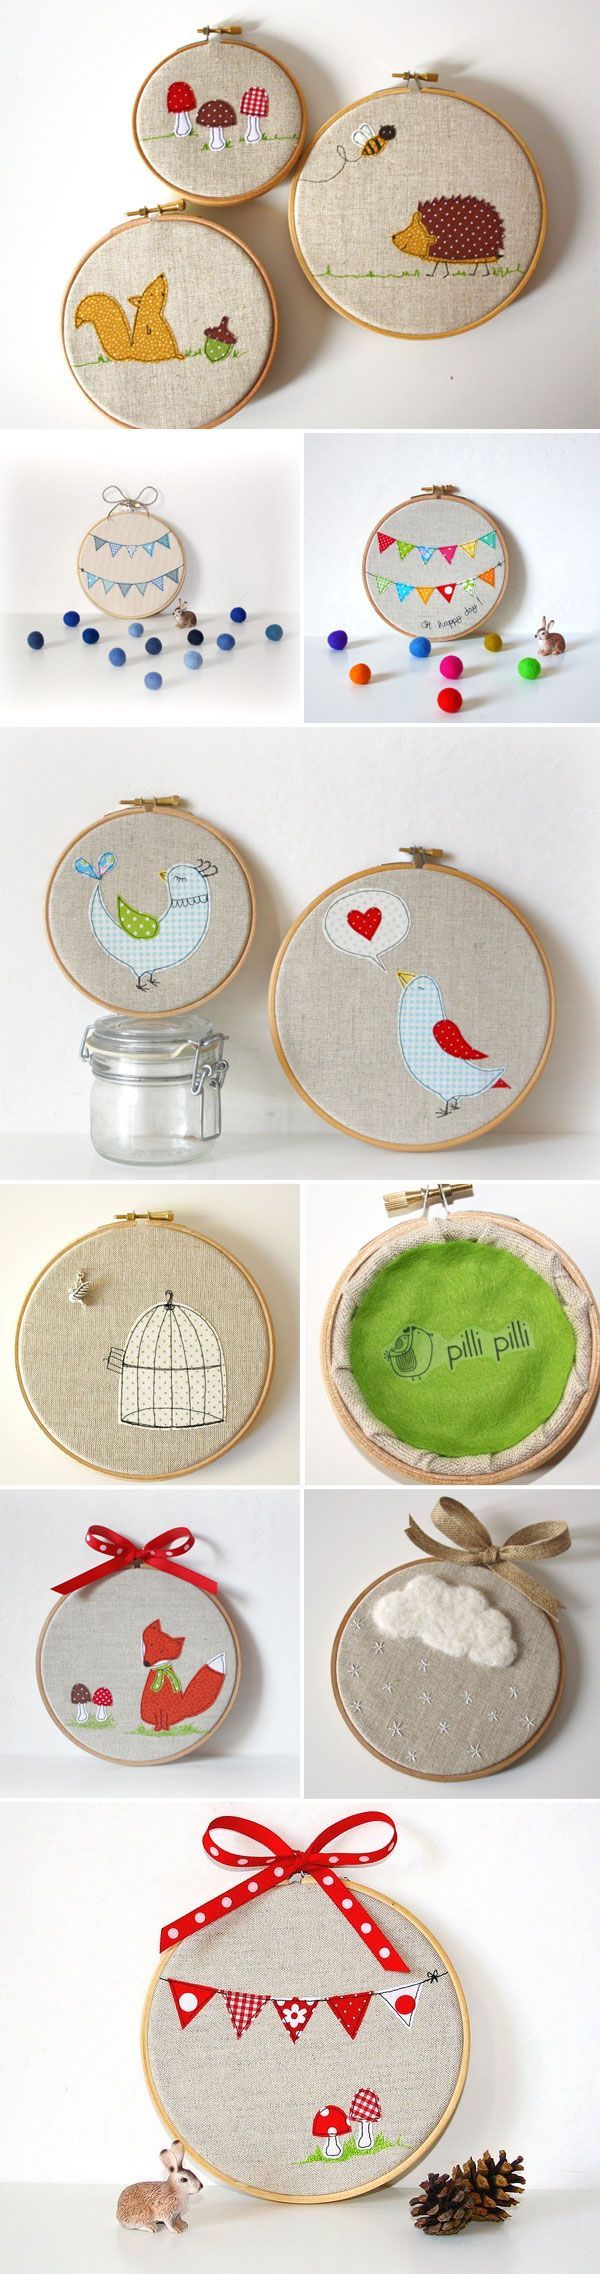 DIY Inspiration with this Pilli-Pilli-Embroidery. Gather Little Scraps of Fabric and Layer them as like appliques.  These are made